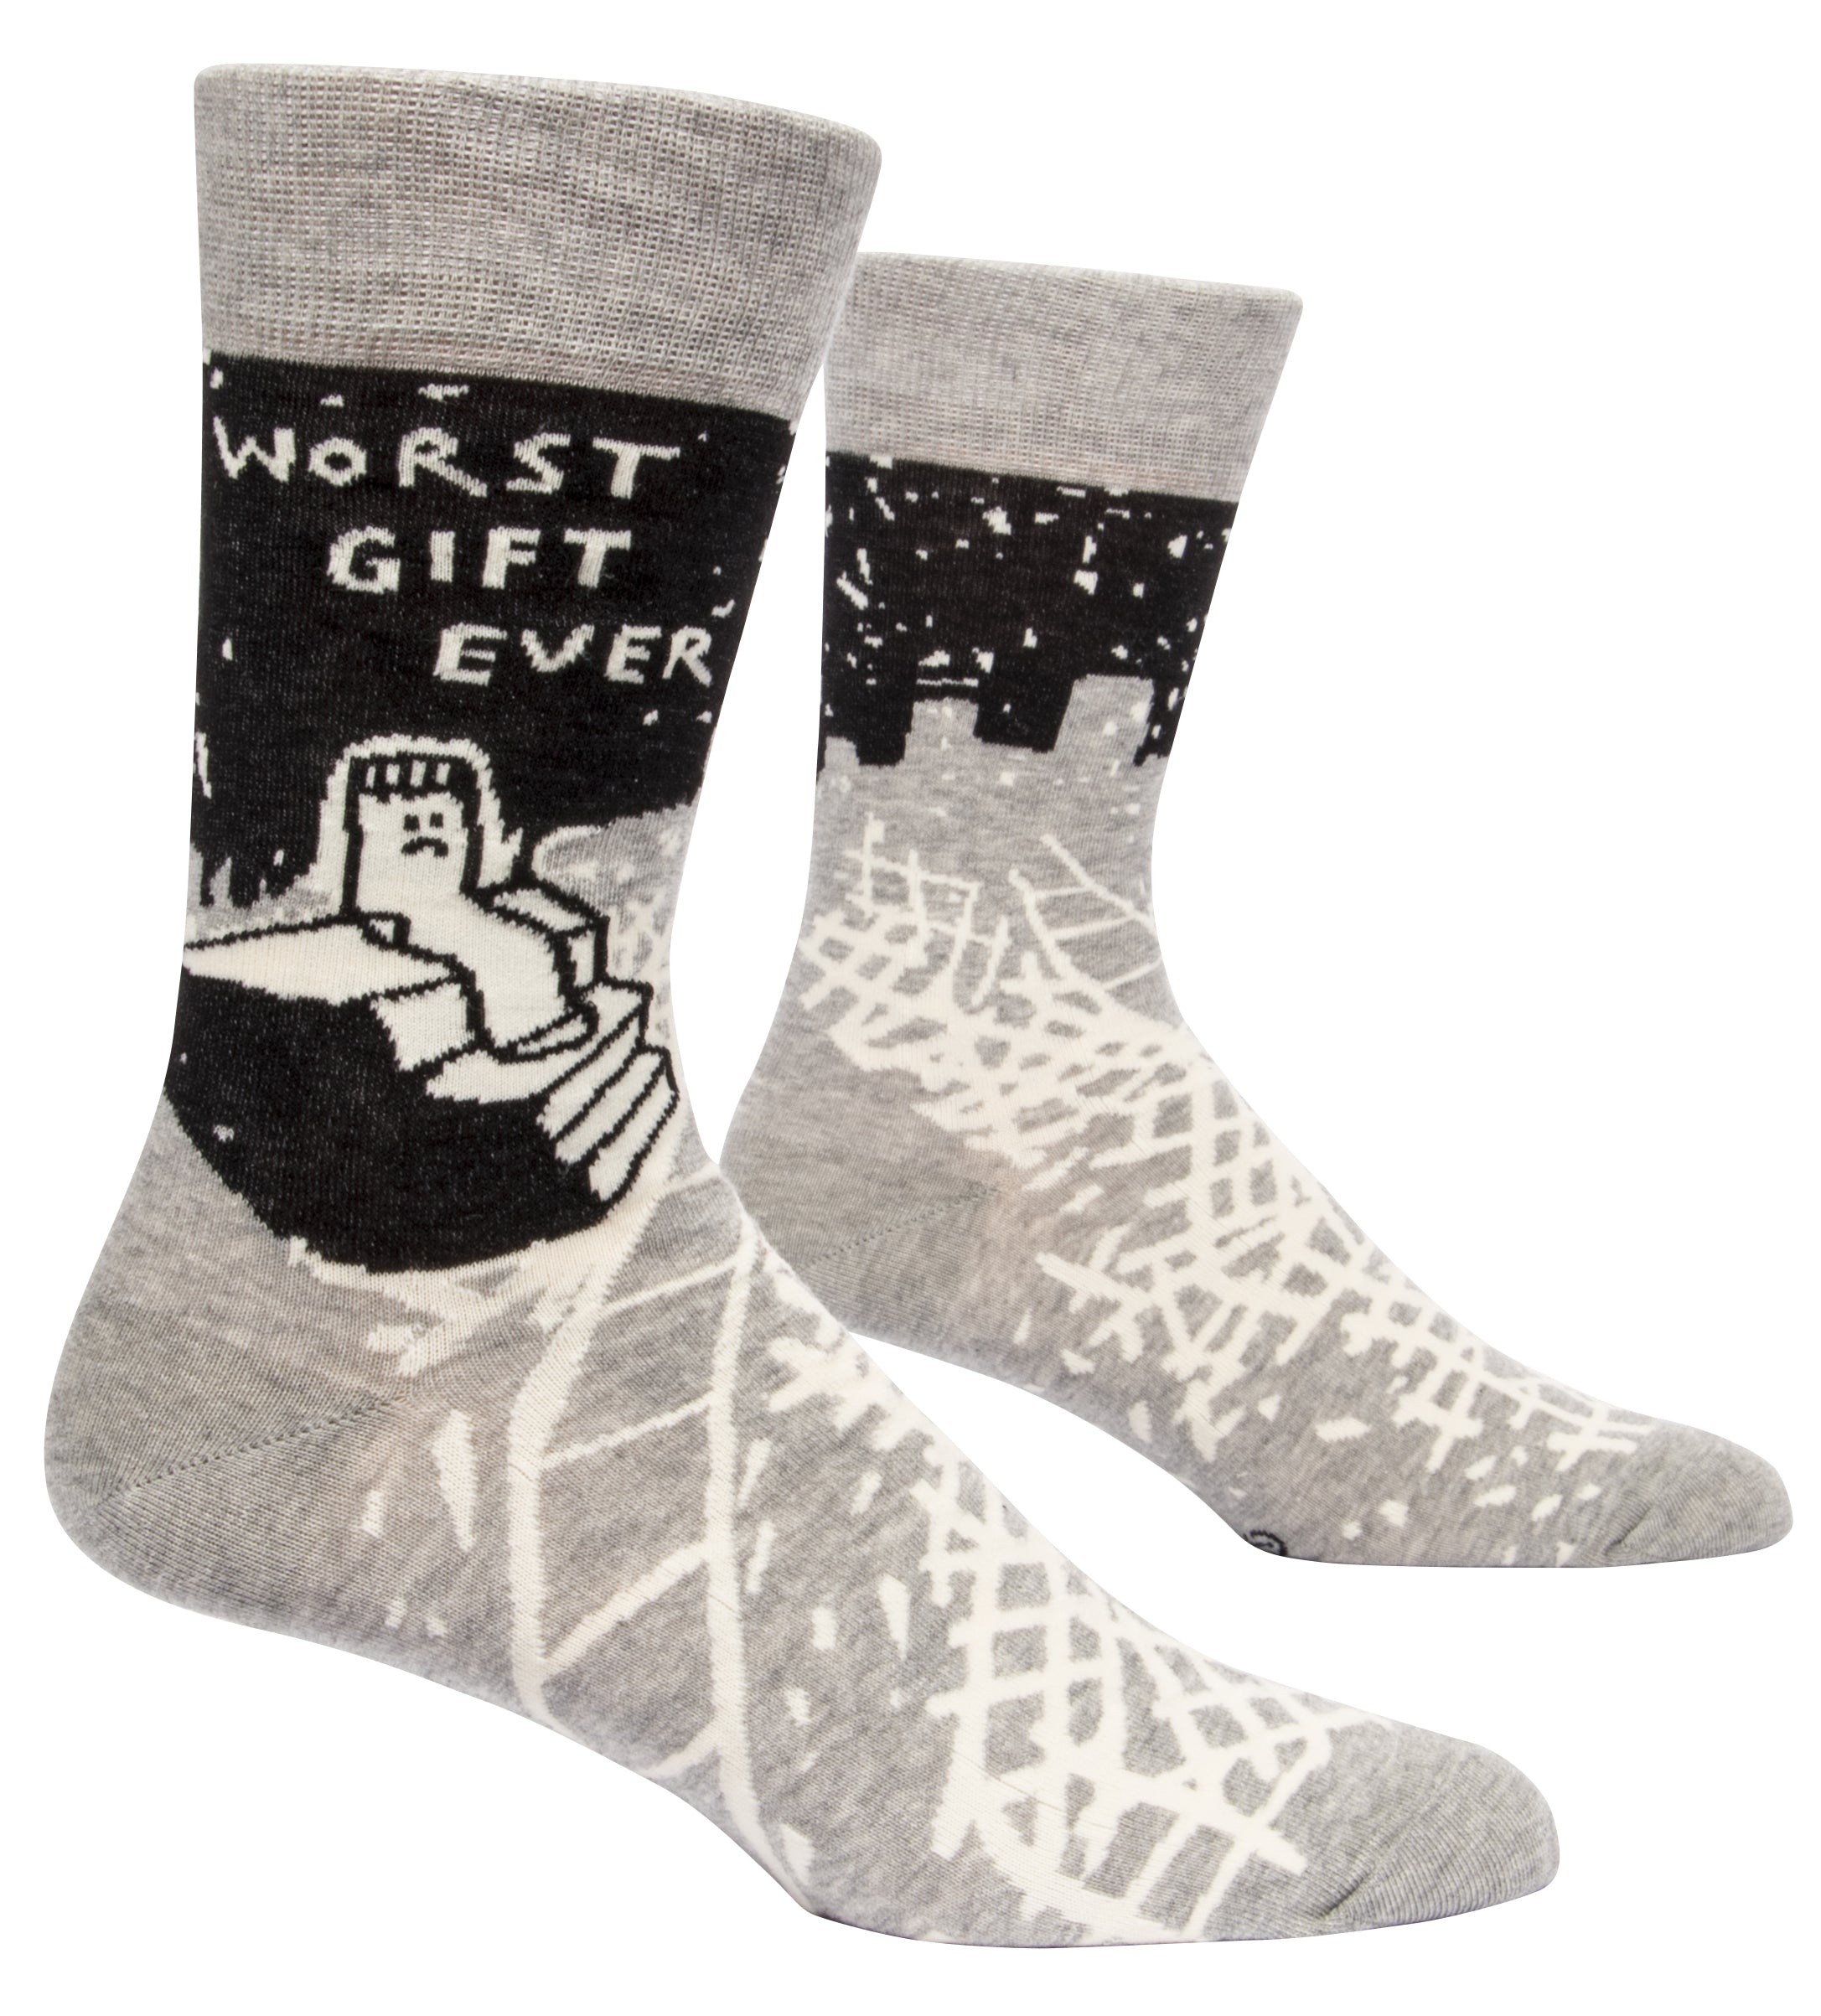 grey socks with a picture of a sad sock on stairs and above it says worst gift ever